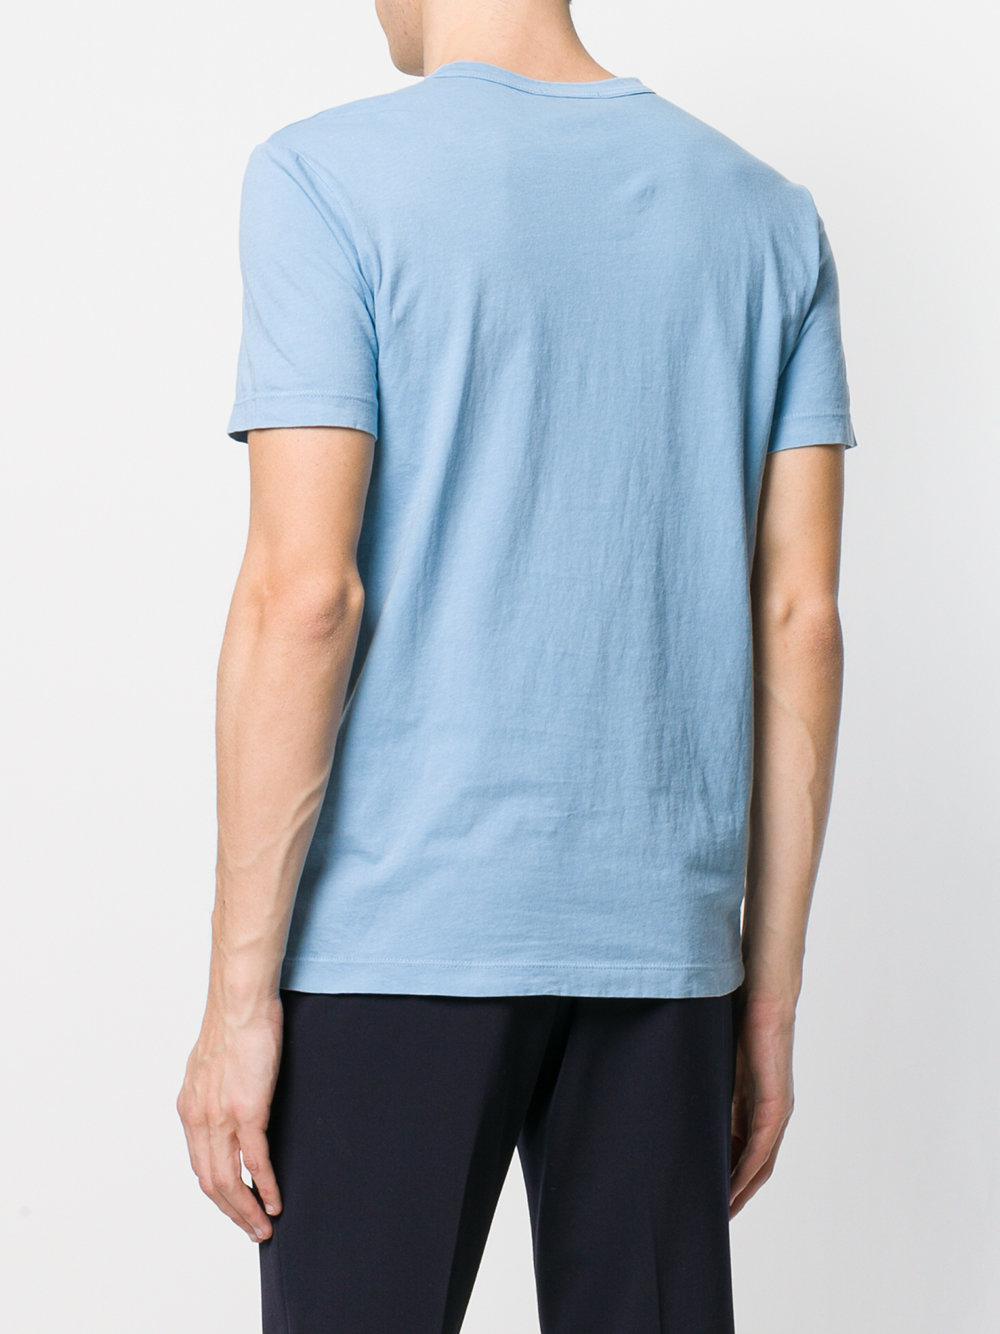 James Perse Cotton Round Neck T-shirt in Blue for Men - Lyst